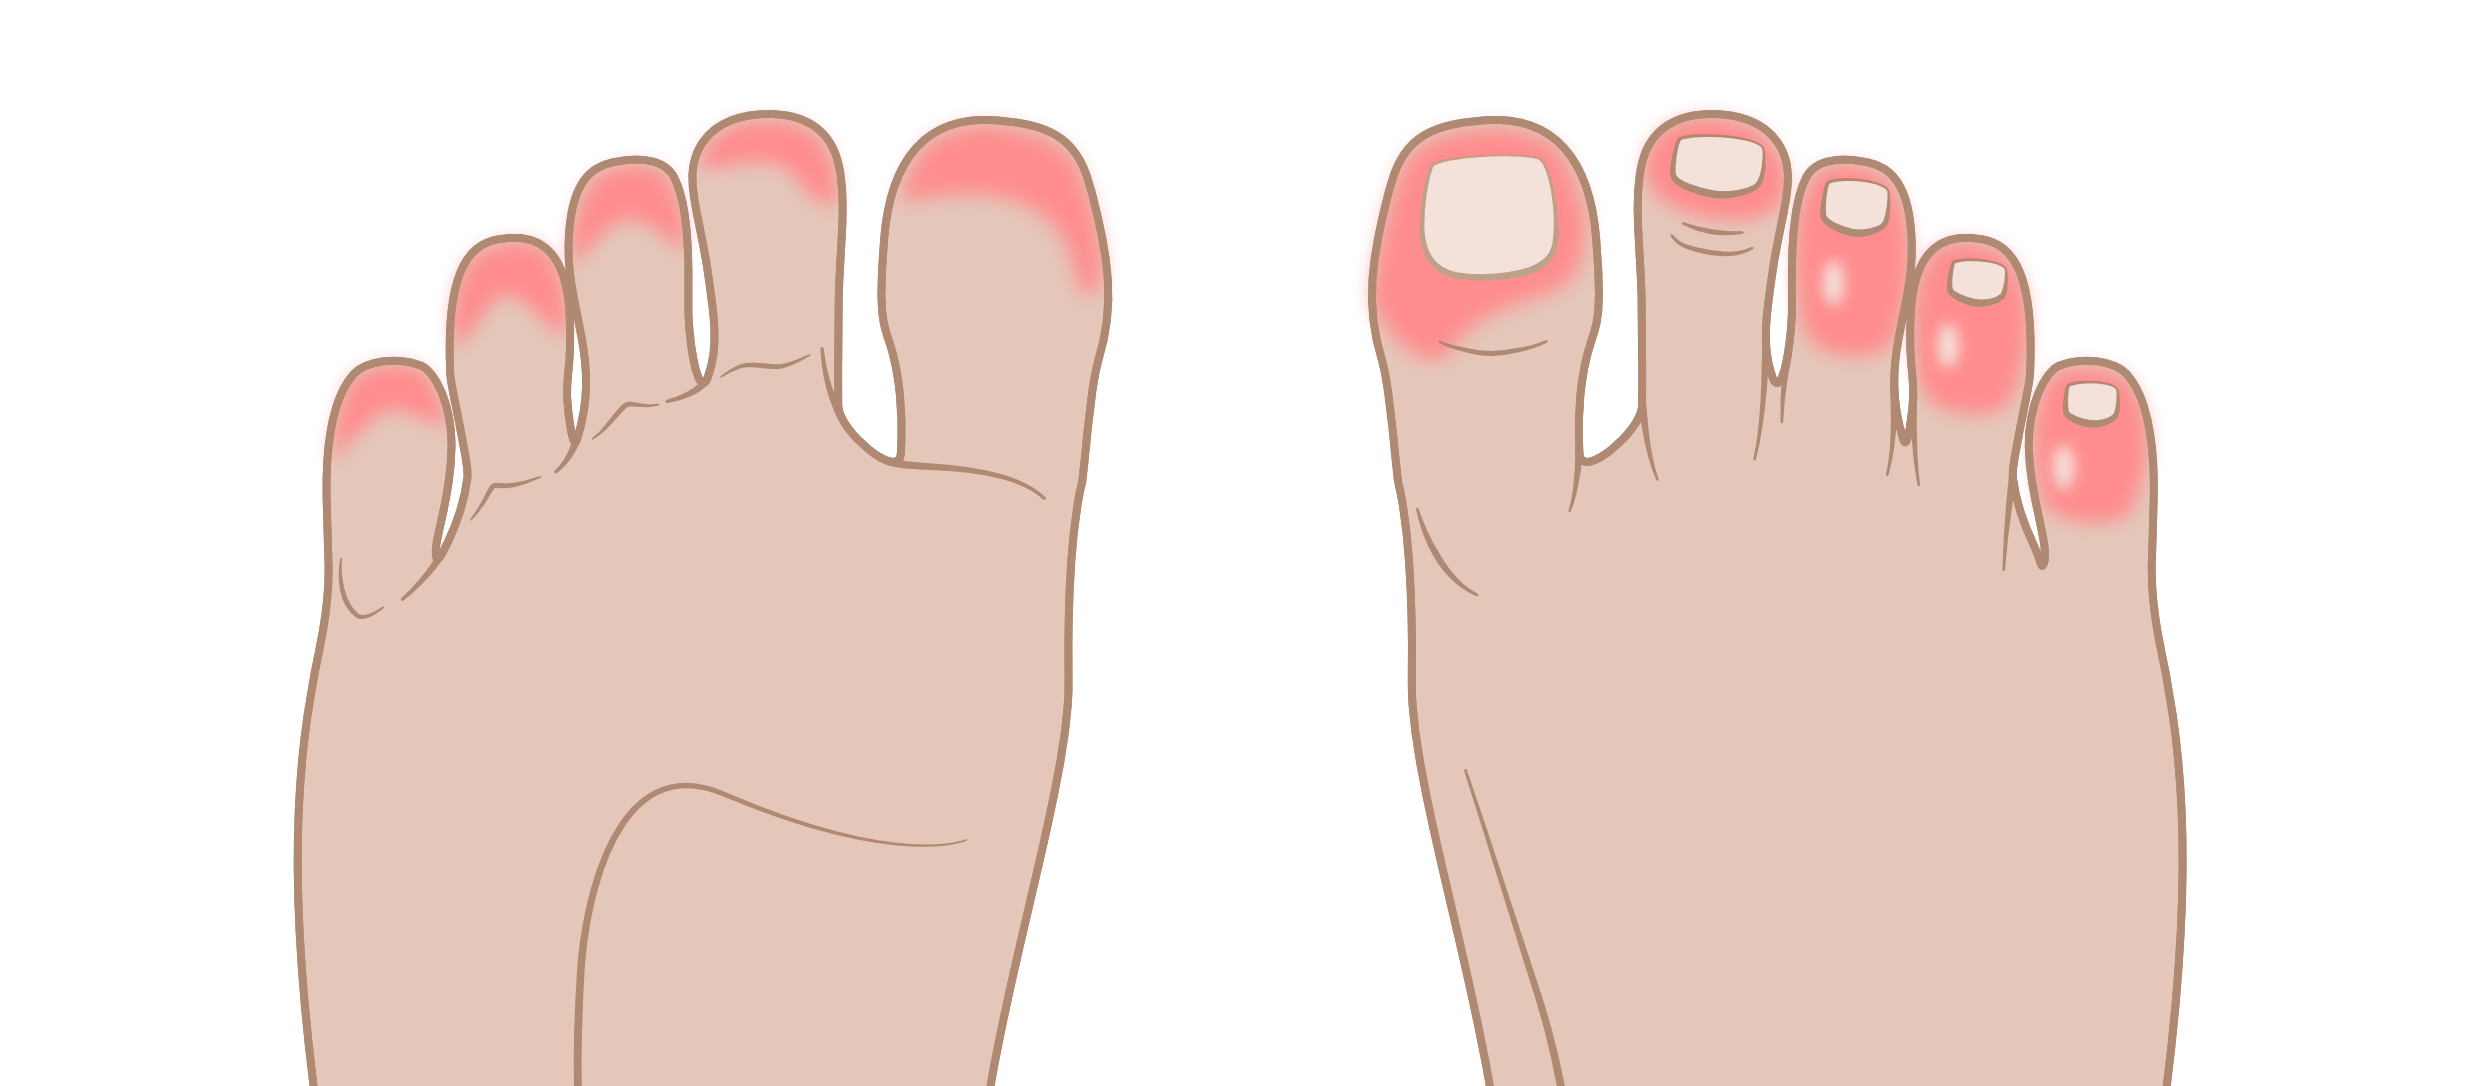 Covid Toes and How To Help Avoid Them - Insoles and Orthotics - Healthy Step